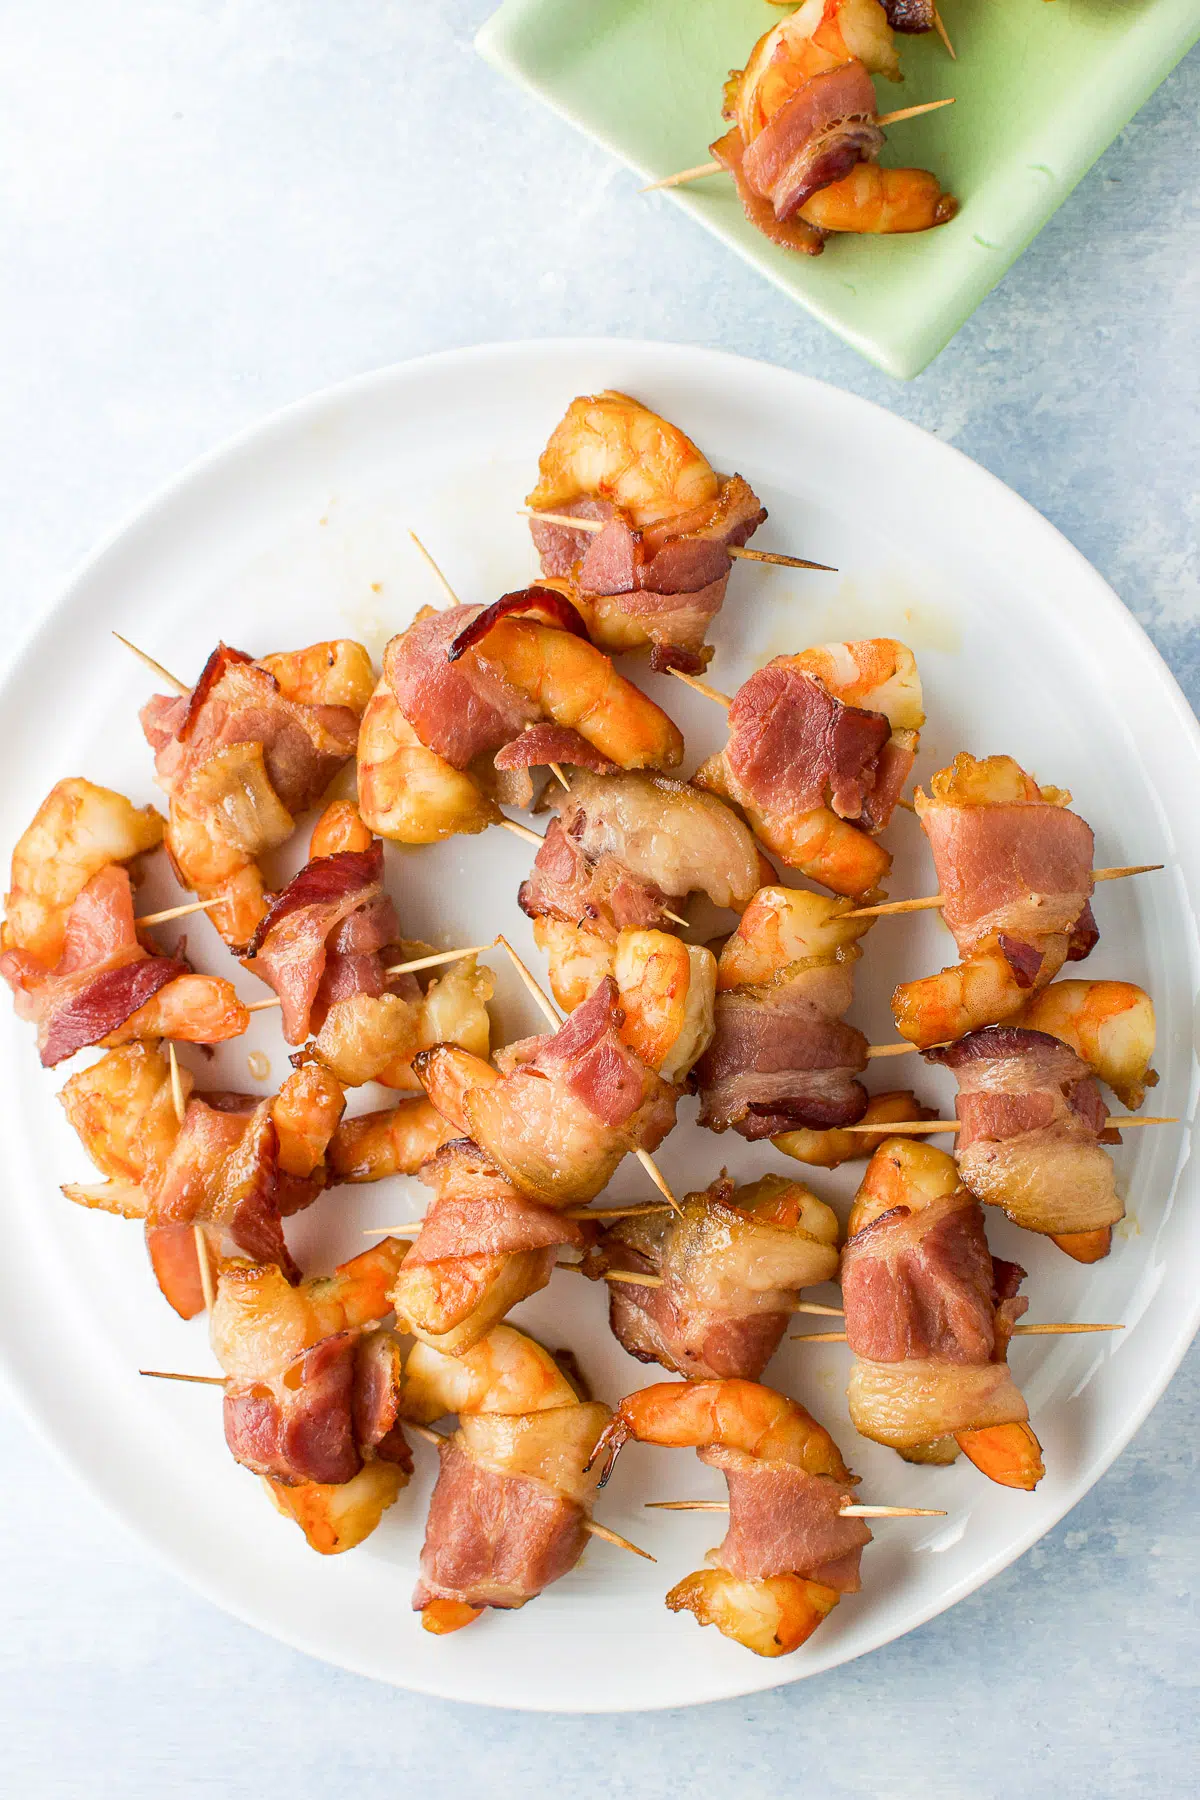 Overhead view of the white plate with bacon wrapped shrimp